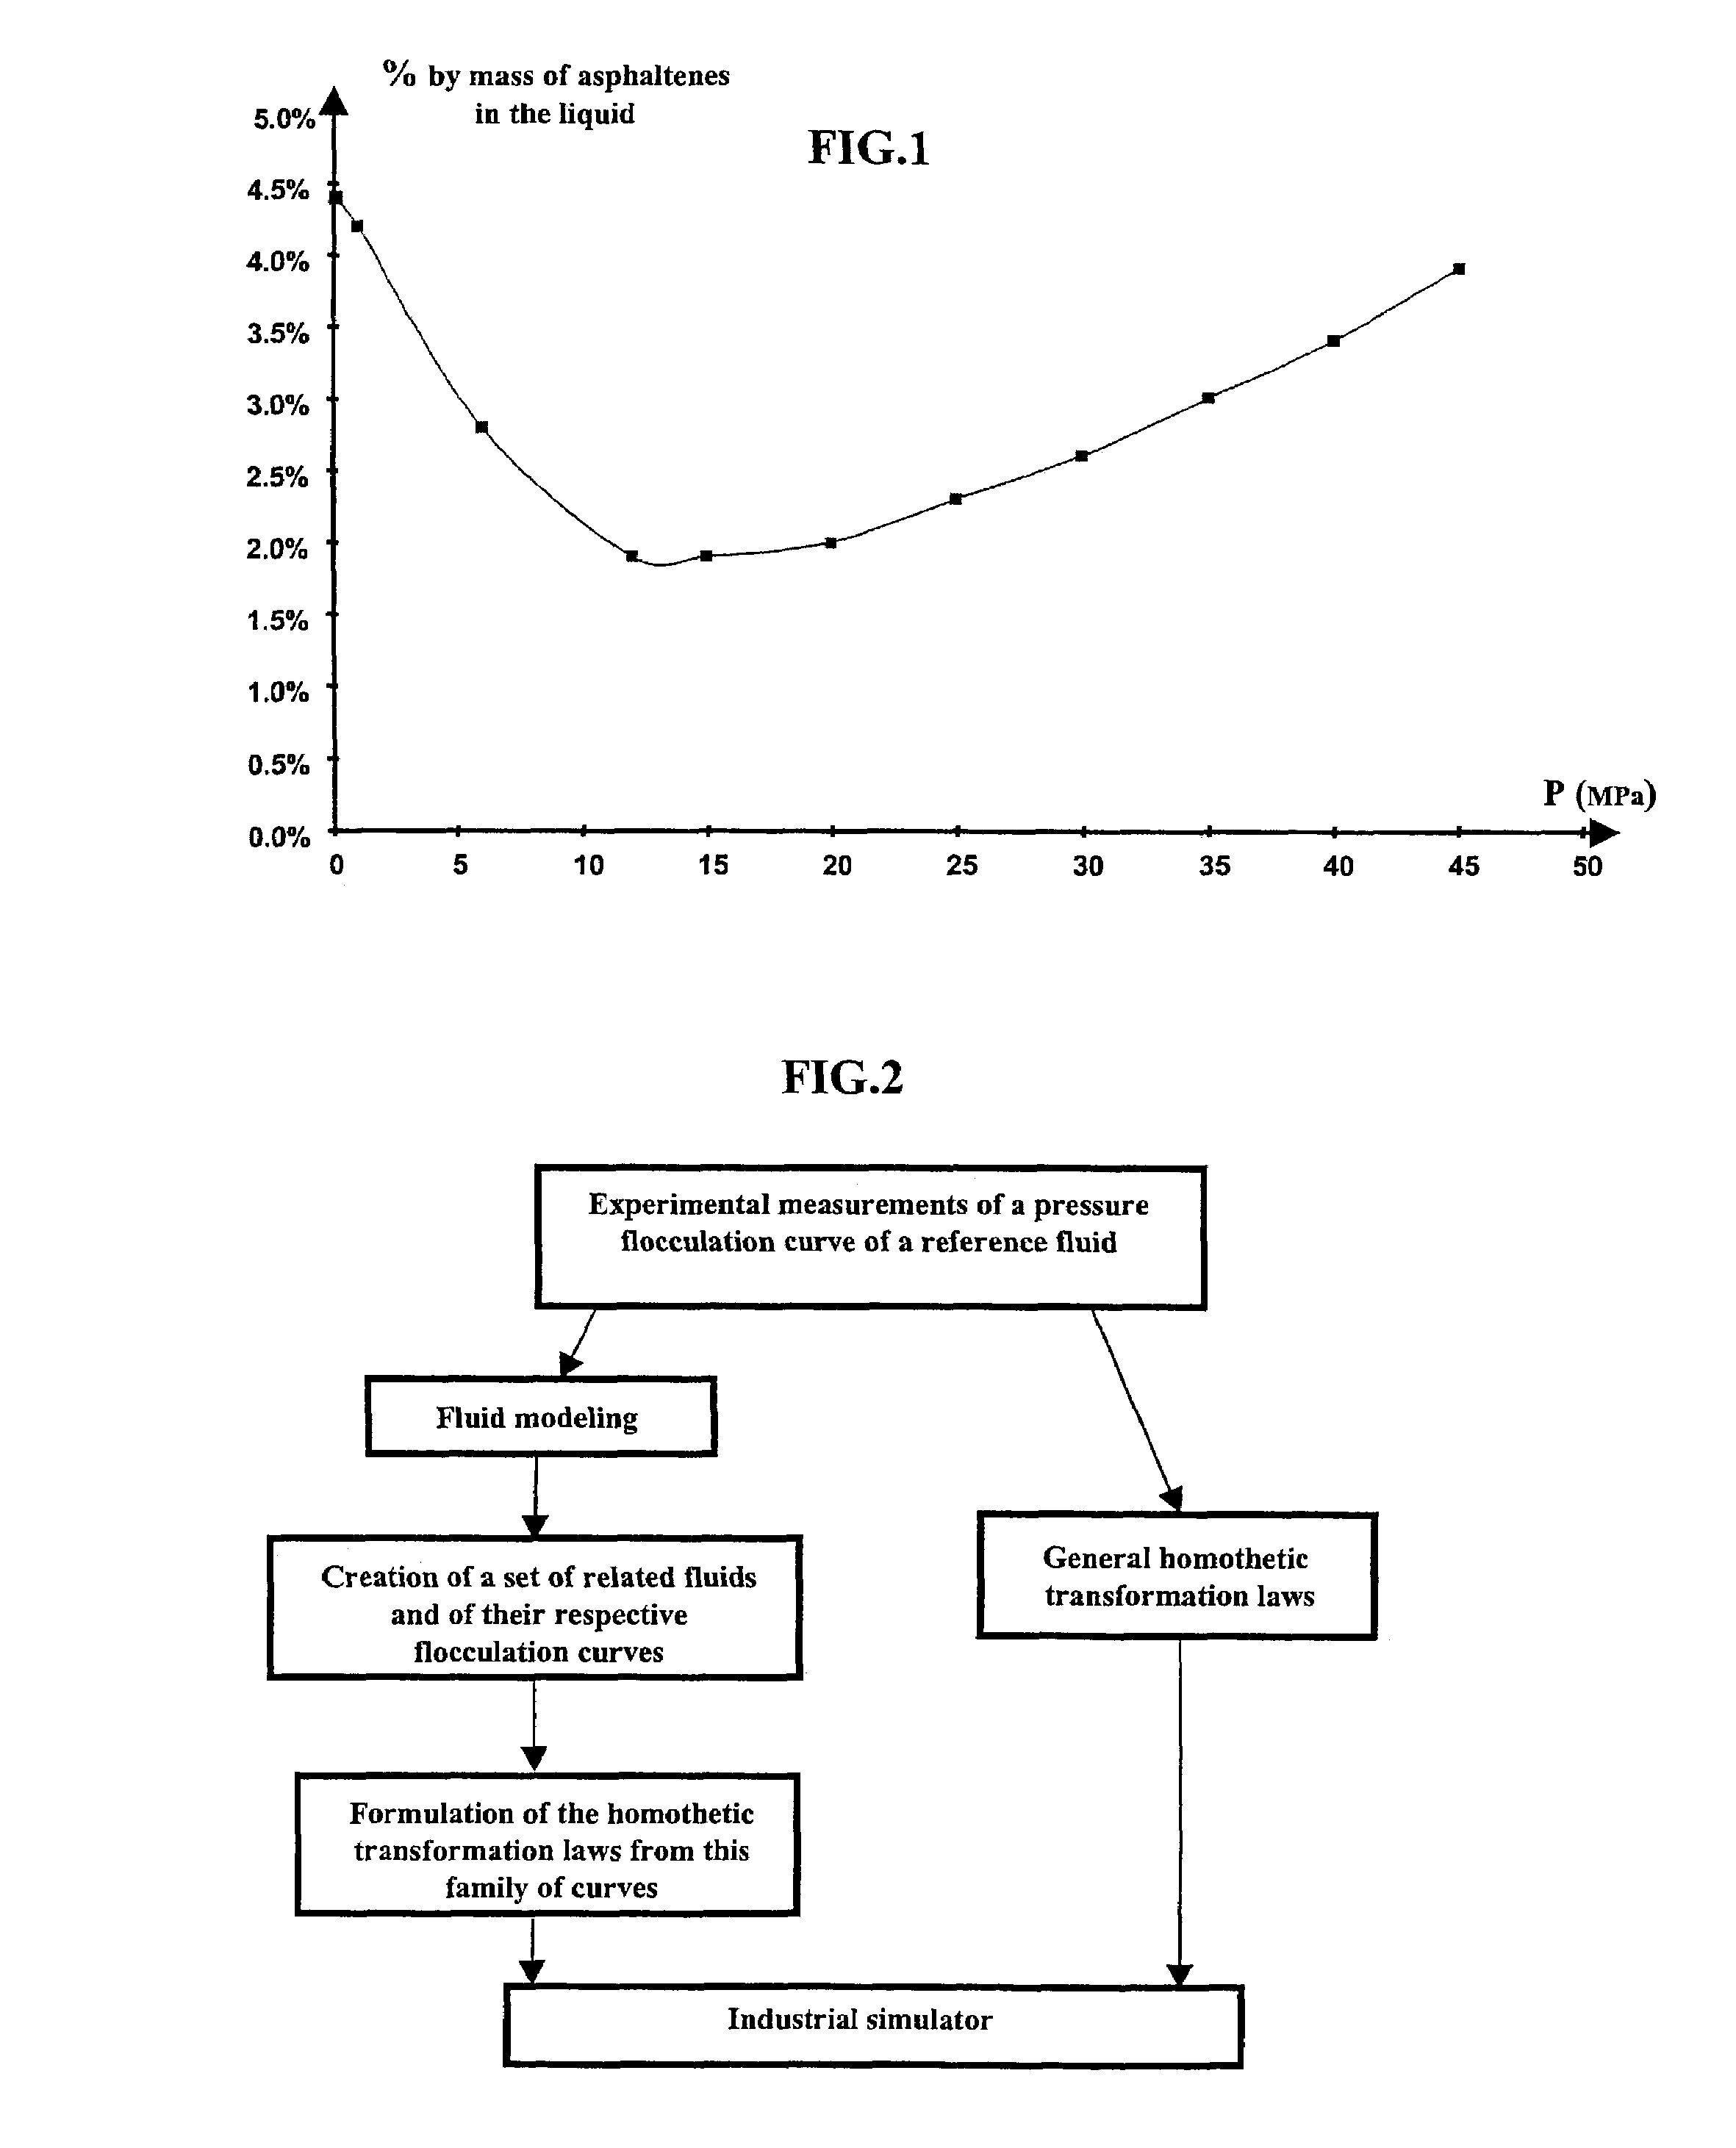 Method for modeling asphaltenes flocculation conditions in hydrocarbon-containing fluids related to a reference fluid